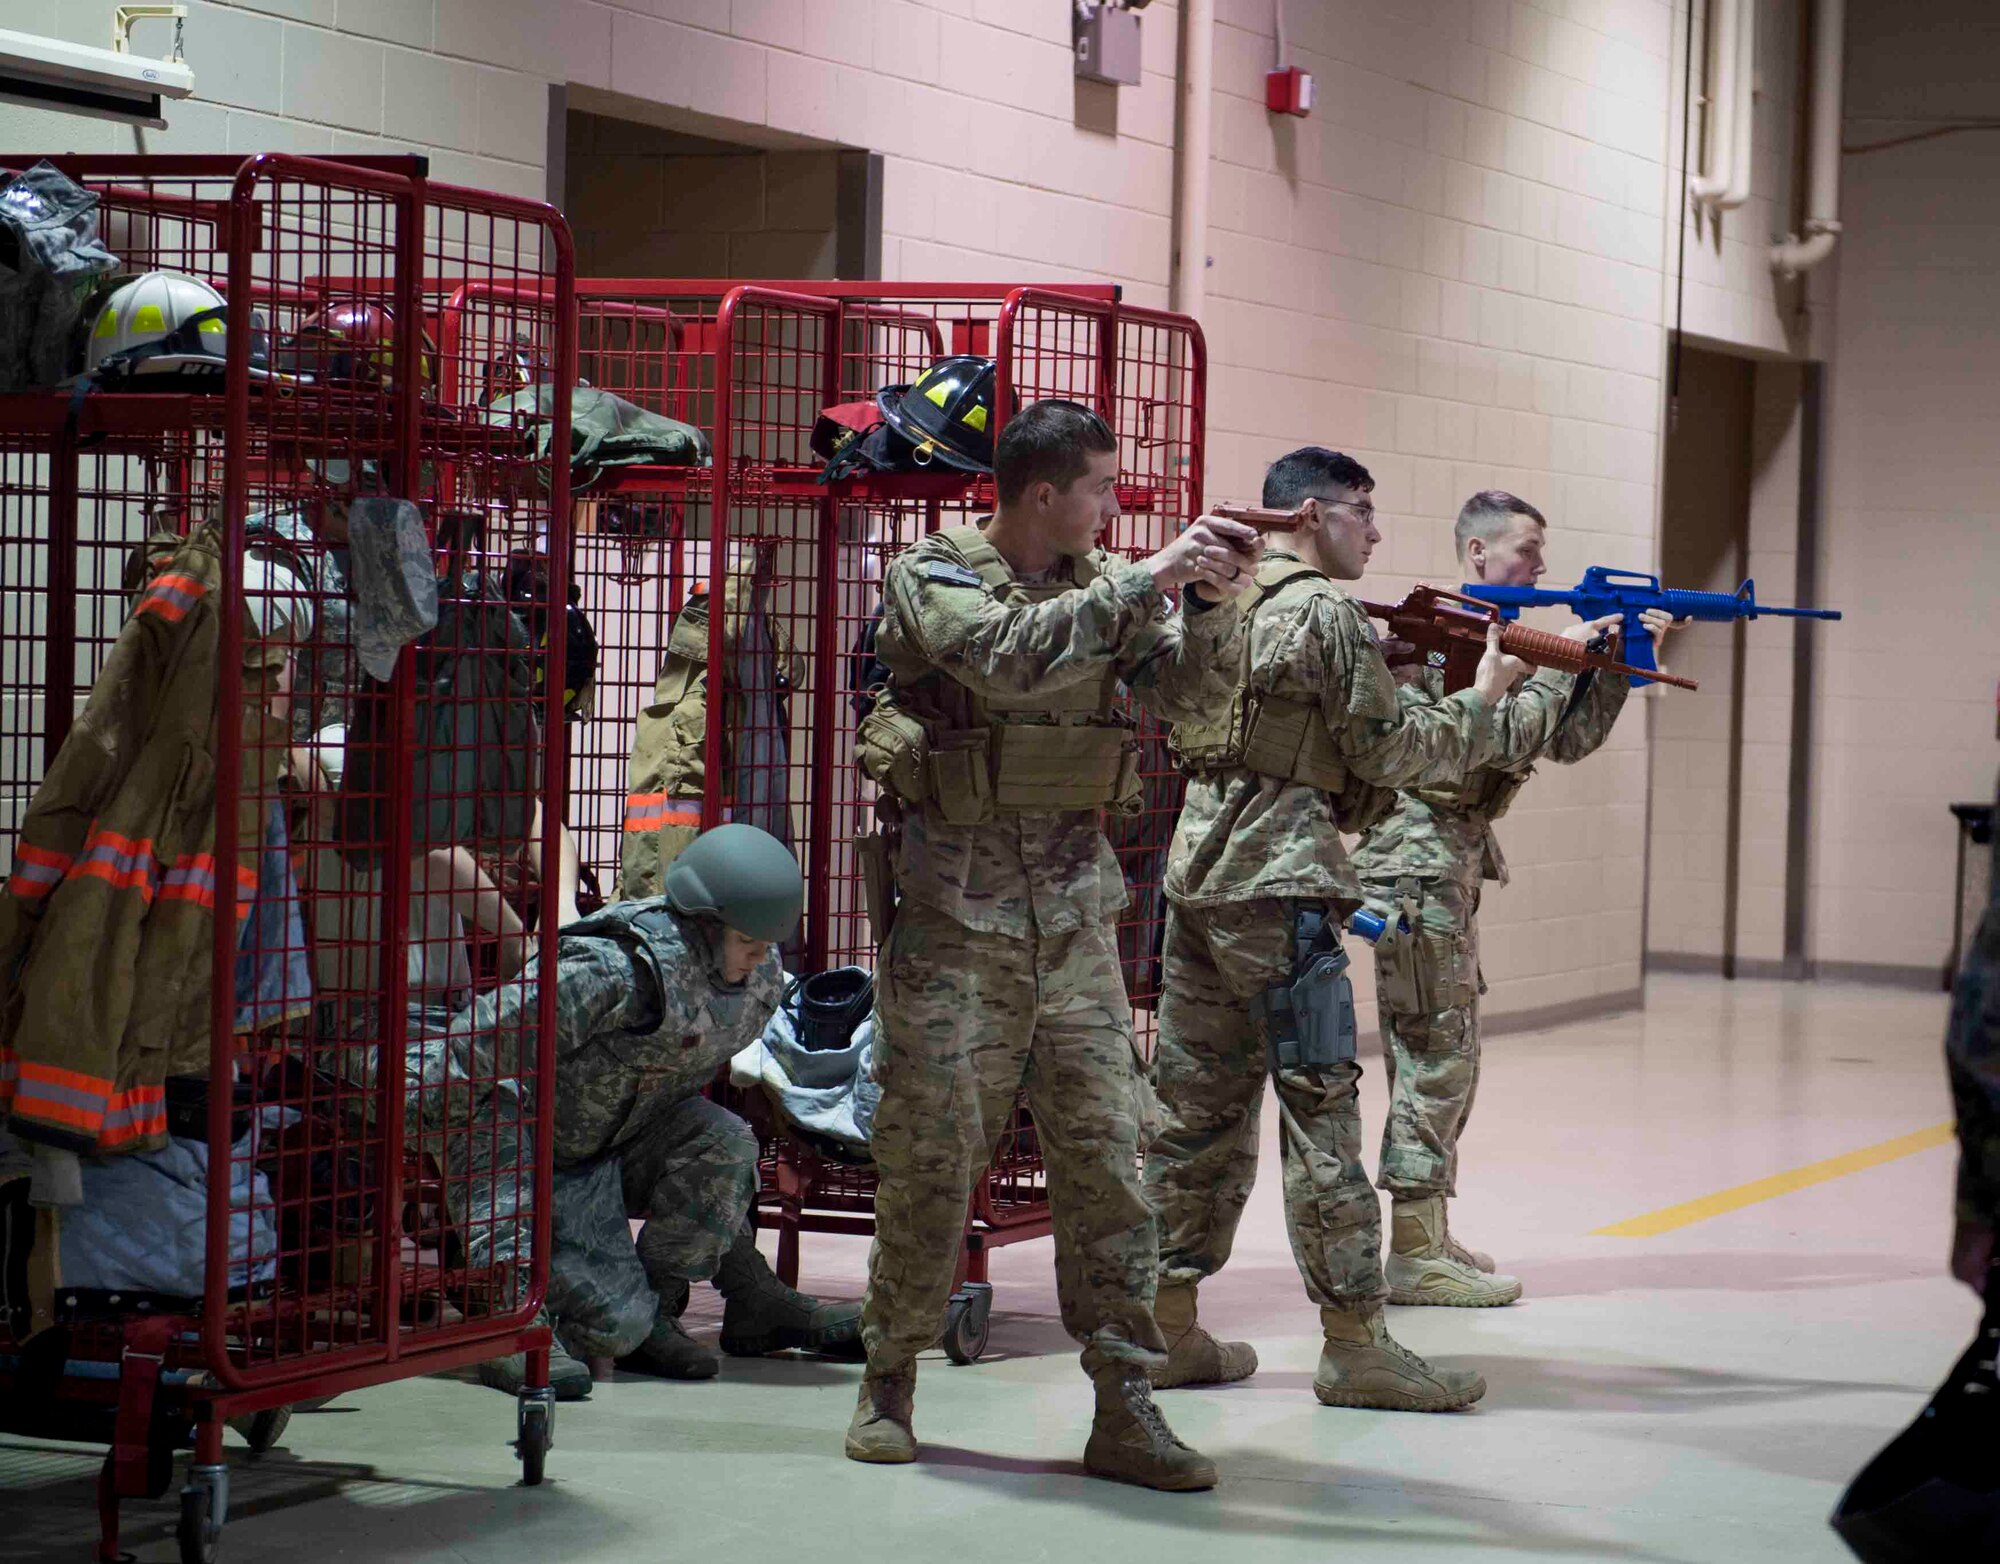 Air Commandos with the 1st Special Operations Security Forces and the 1st Special Operations Civil Engineer Squadron perform first responder duties during an active shooter exercise at Hurlburt Field, Fla., March 10, 2017. Air Commandos with the 1st Special Operations Security Forces Squadron, 1st SOCES and the 1st Special Operations Medical Group participated in an exercise to implement new procedures for tactical responders. (U.S. Air Force photo by Senior Airman Krystal M. Garrett)